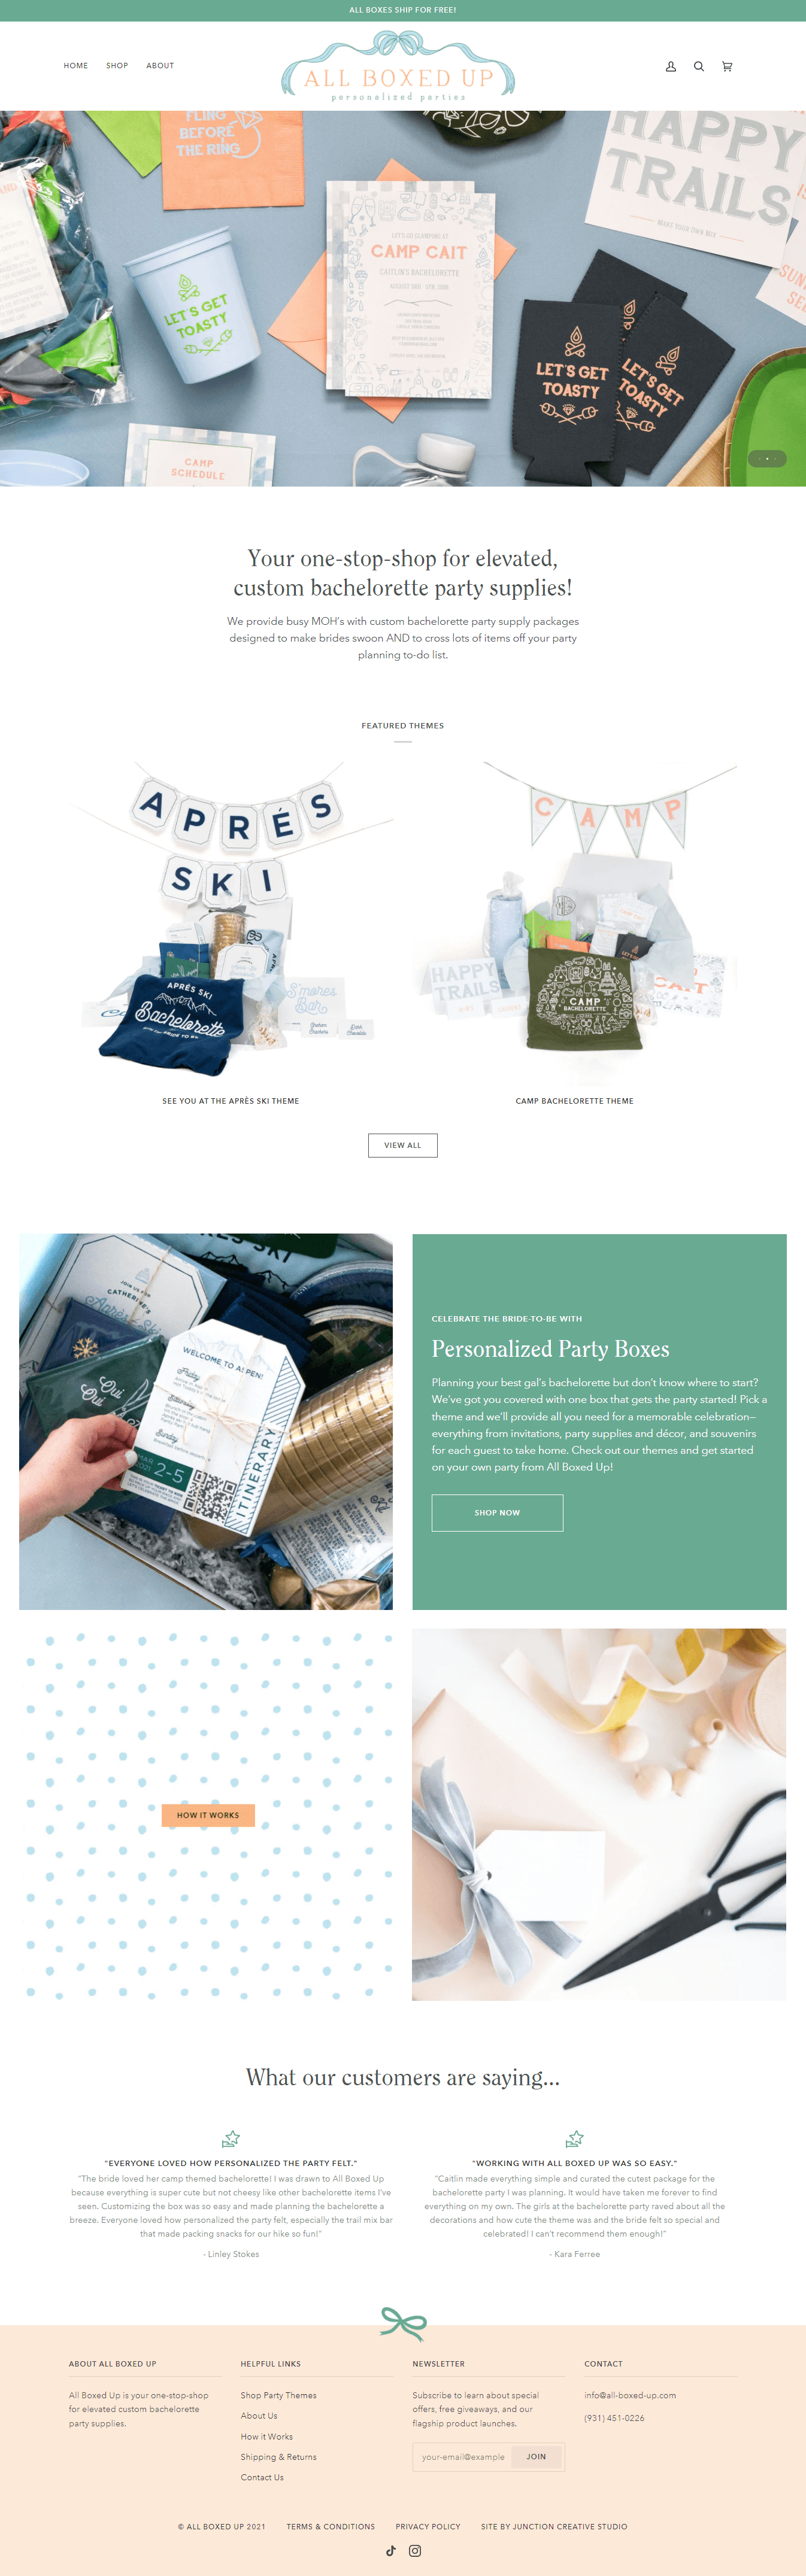 All Boxed Up Shopify Website Design by Junction Creative Studio